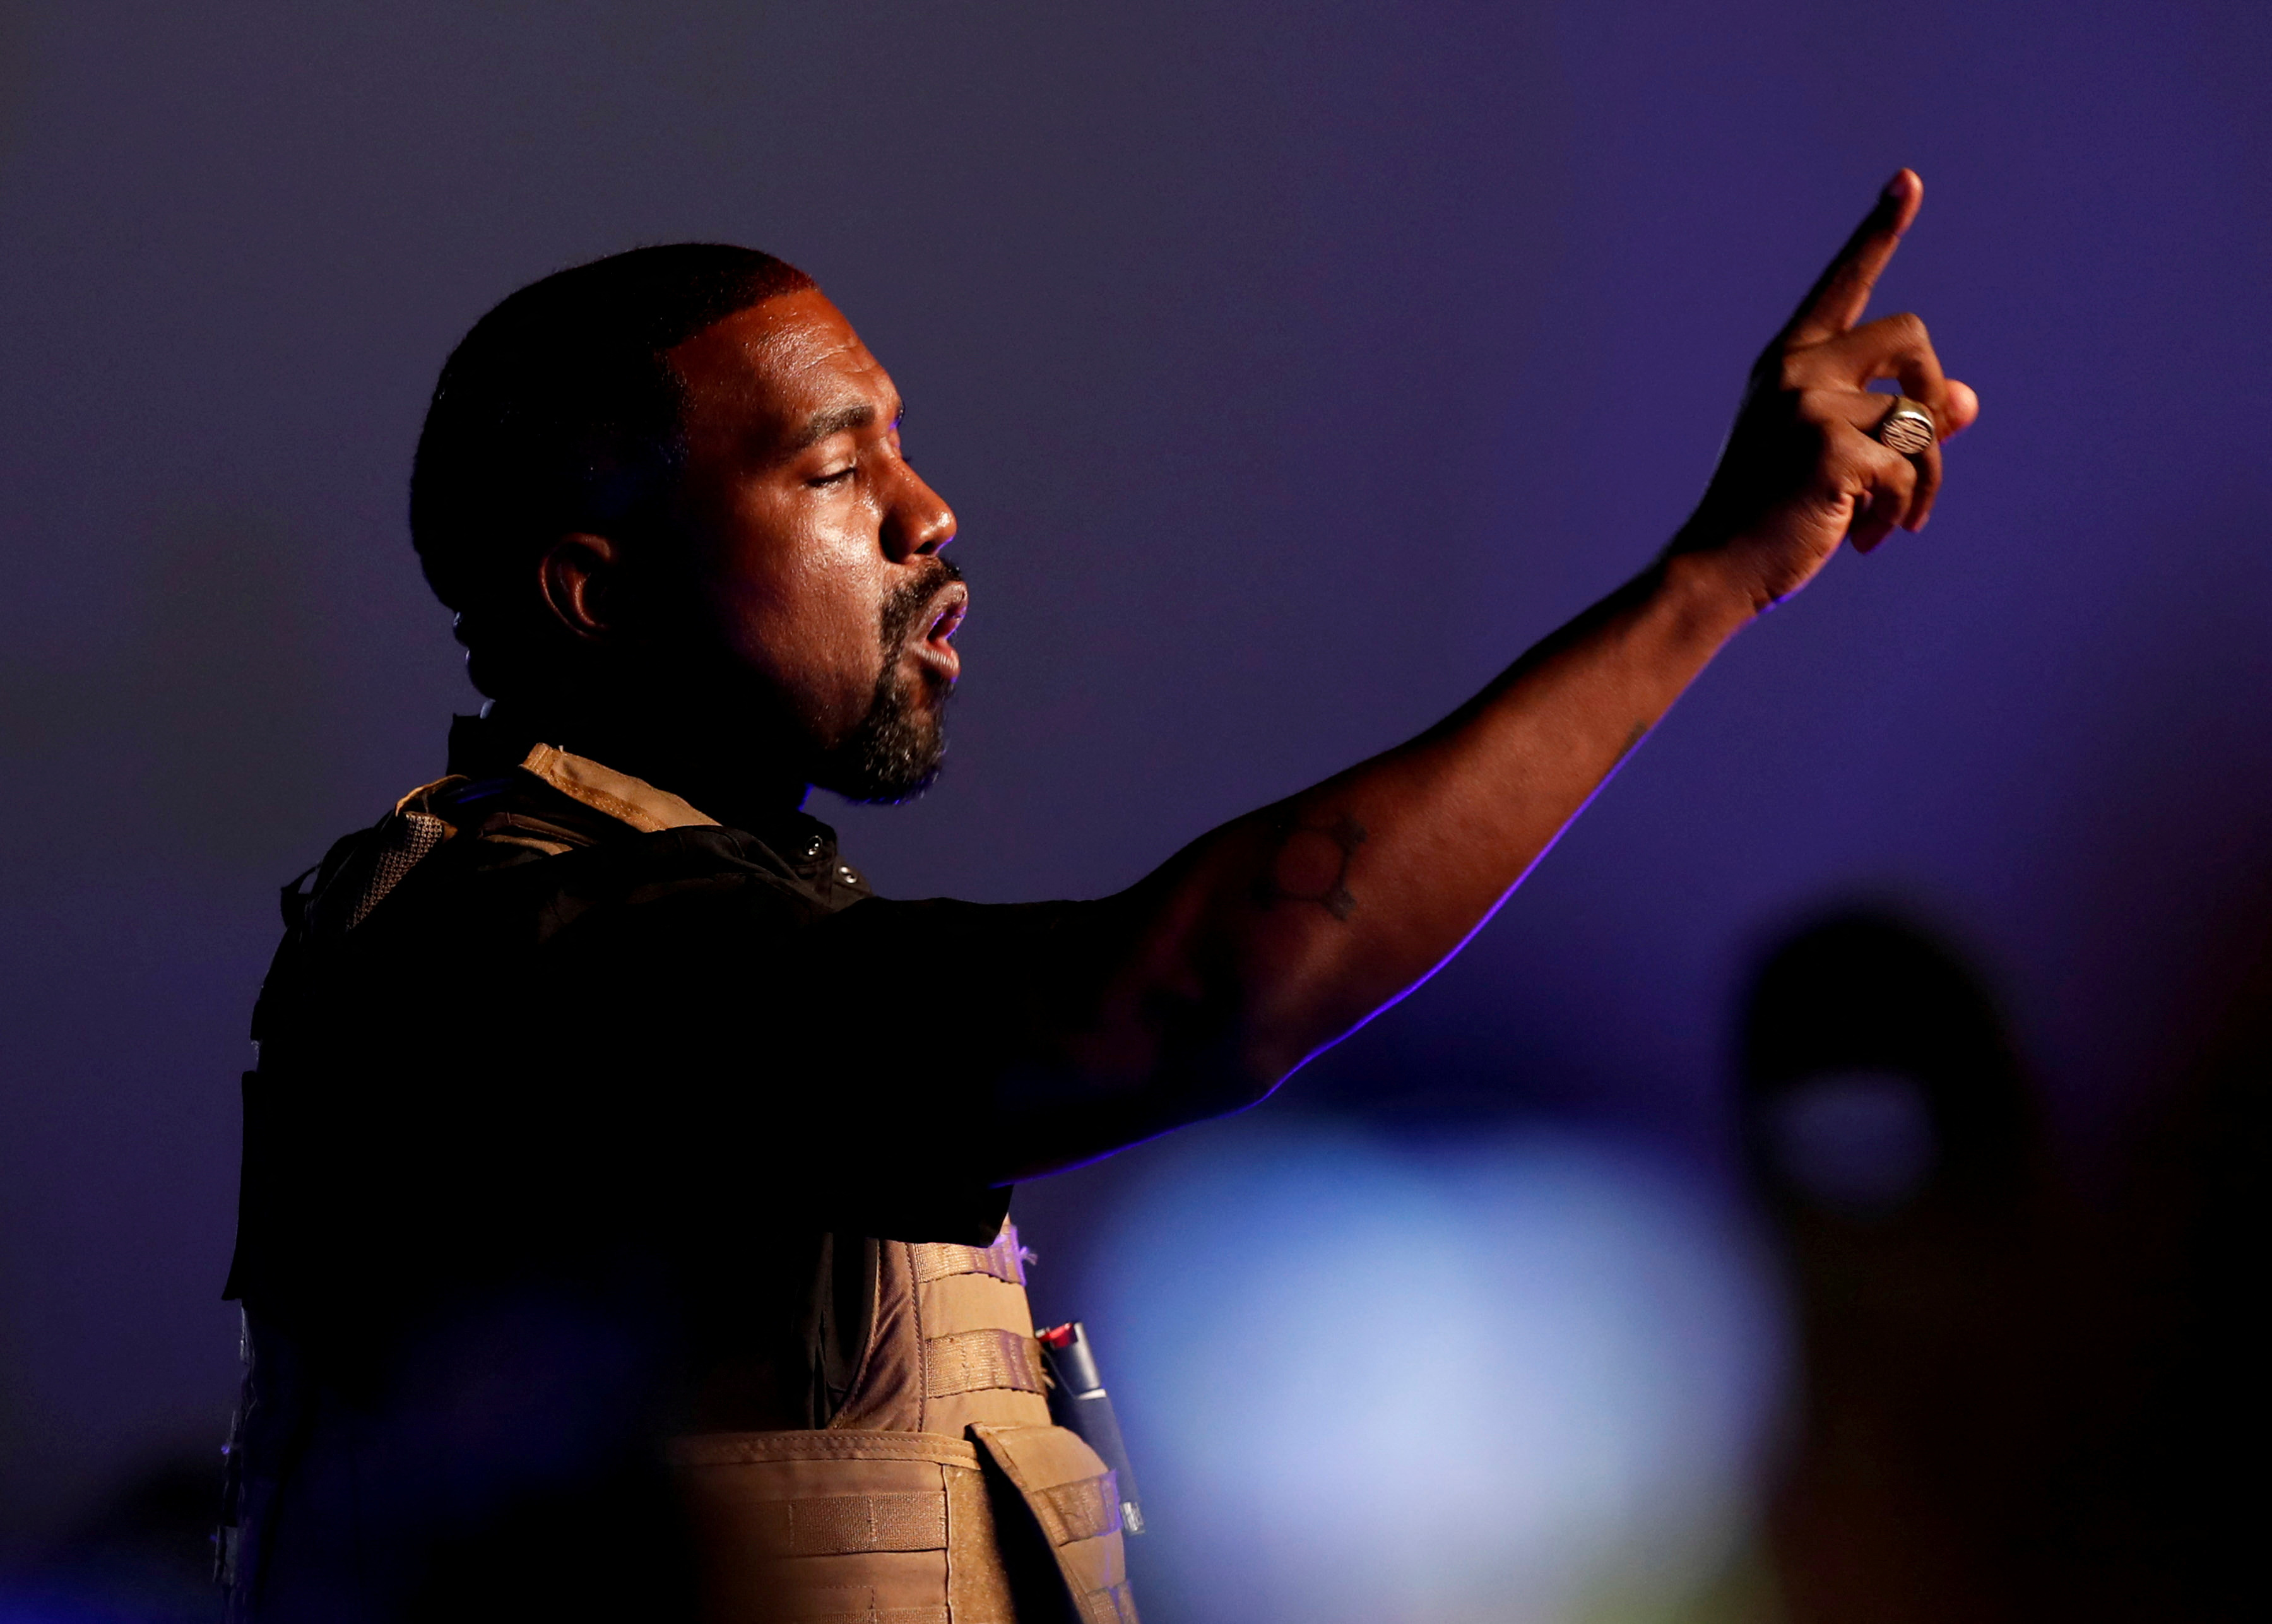  Kanye West (REUTERS/Randall Hill)